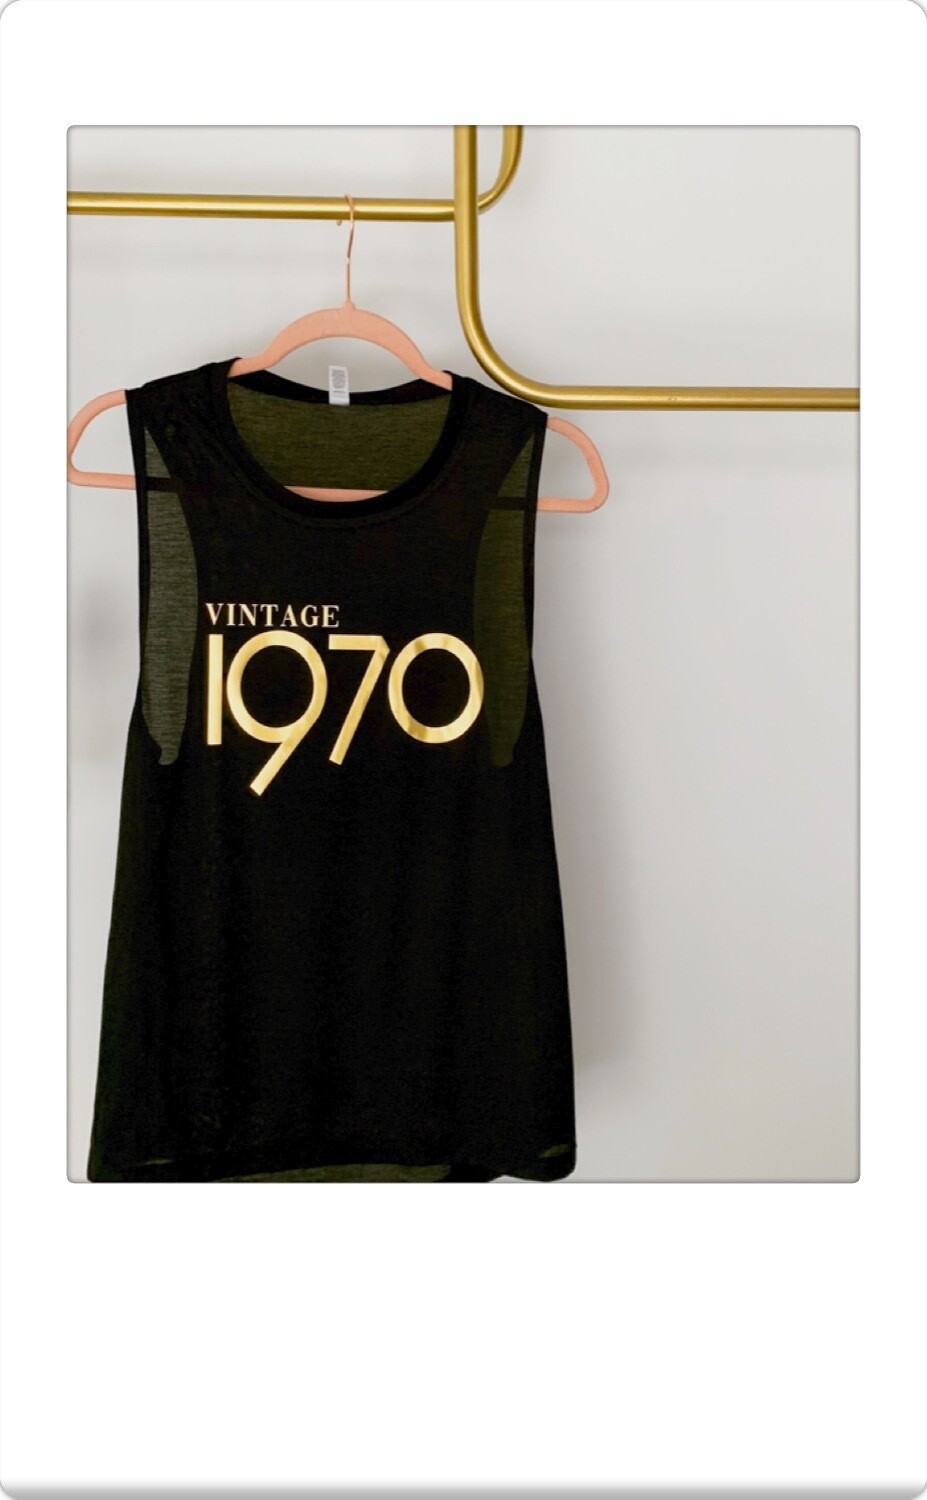 Vintage Year tank - Customized To Your Year!